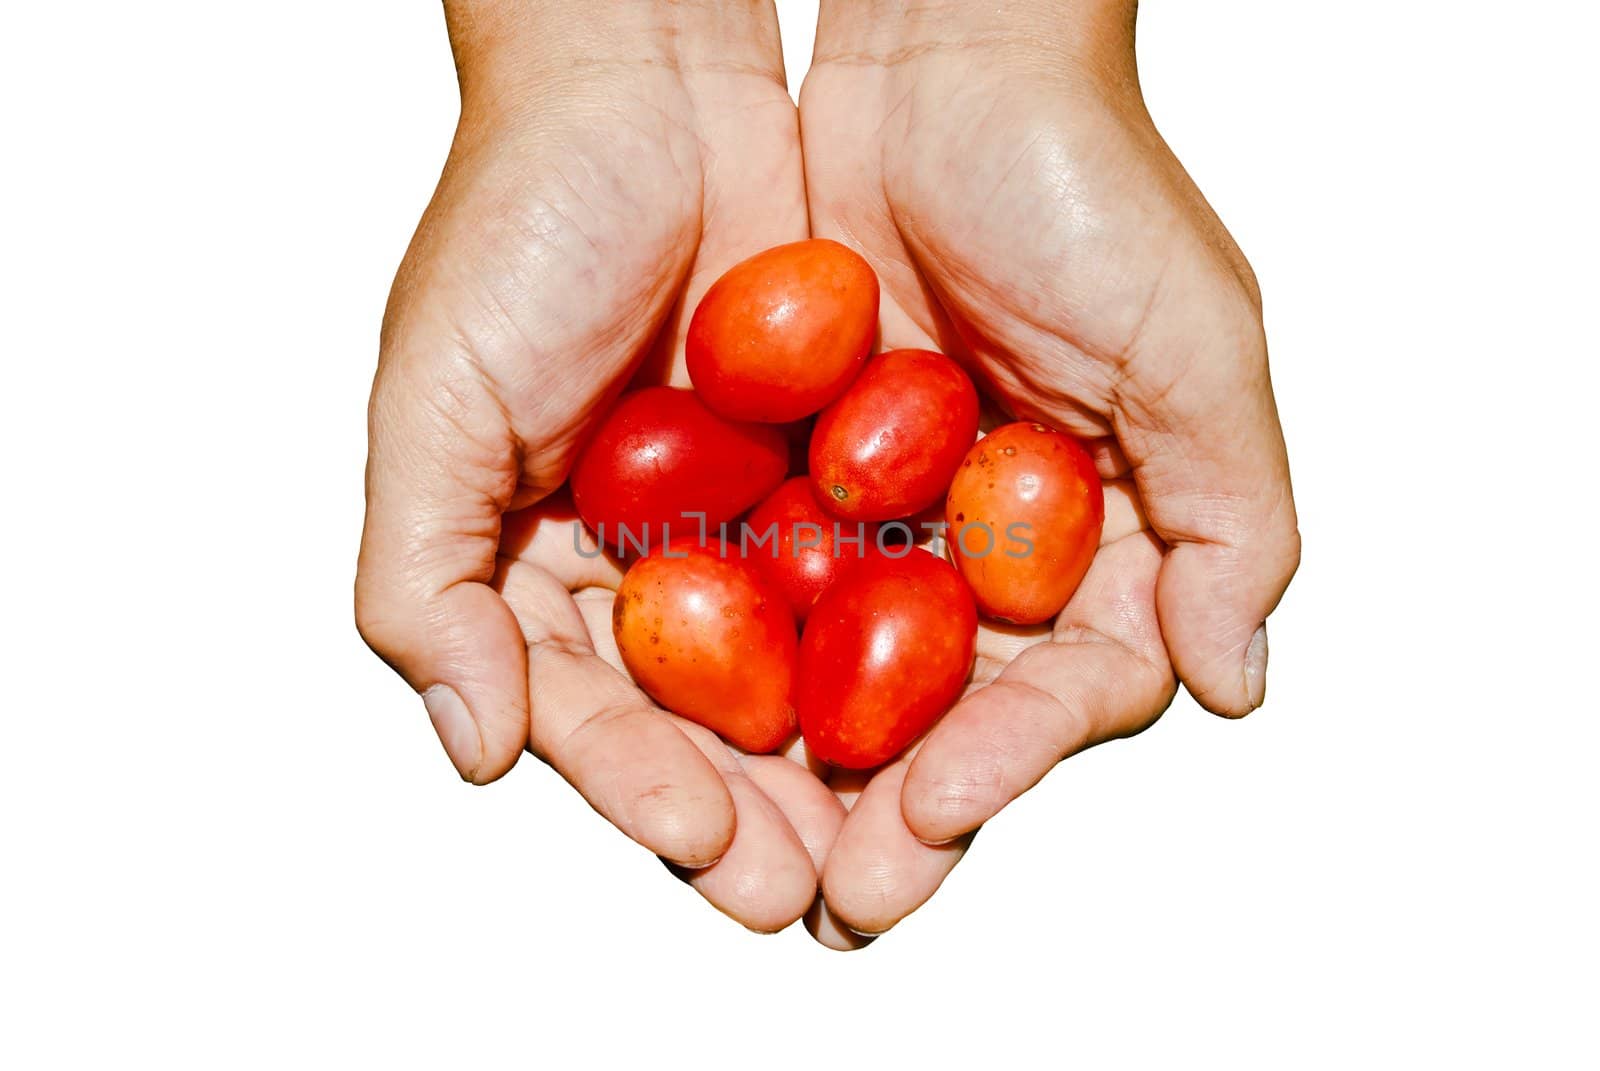 Farmer's palm with small tomatos inside
 by sasilsolutions